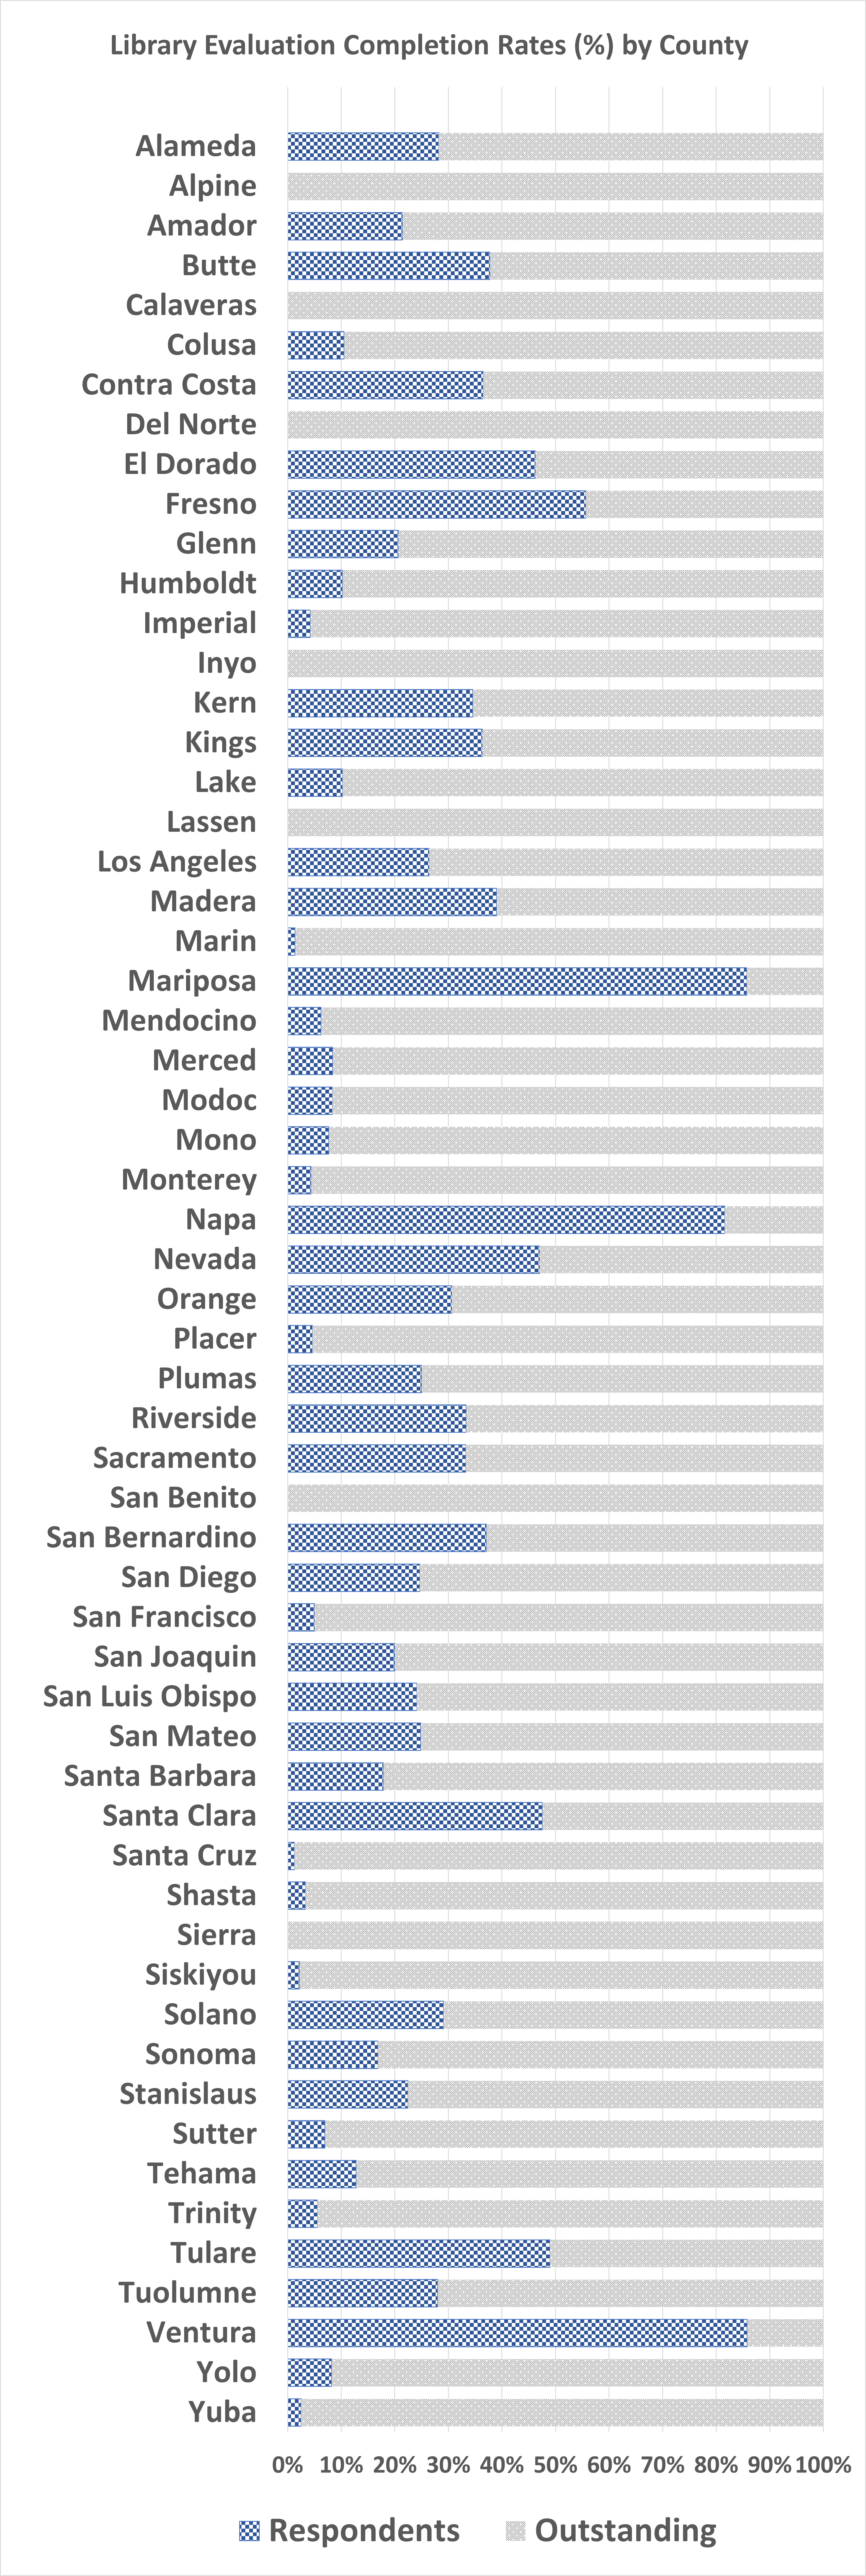 Graph showing the percentage of library evaluation completion rates by each county in California. Table below displays data from graph.